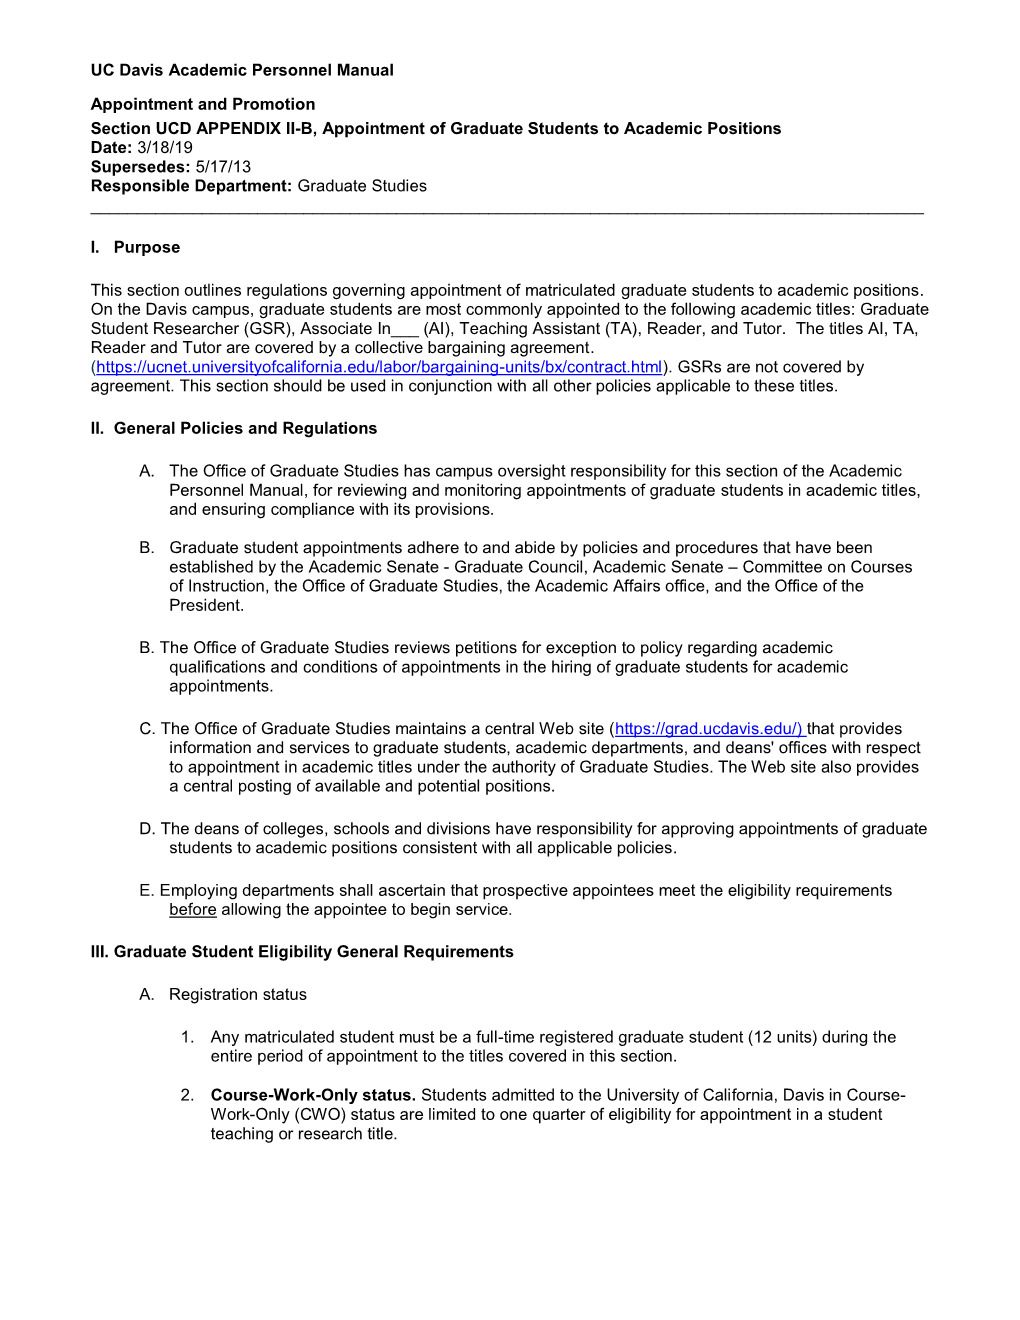 UCD APPENDIX II-B, Appointment of Graduate Students to Academic Positions Date: 3/18/19 Supersedes: 5/17/13 Responsible Department: Graduate Studies ______